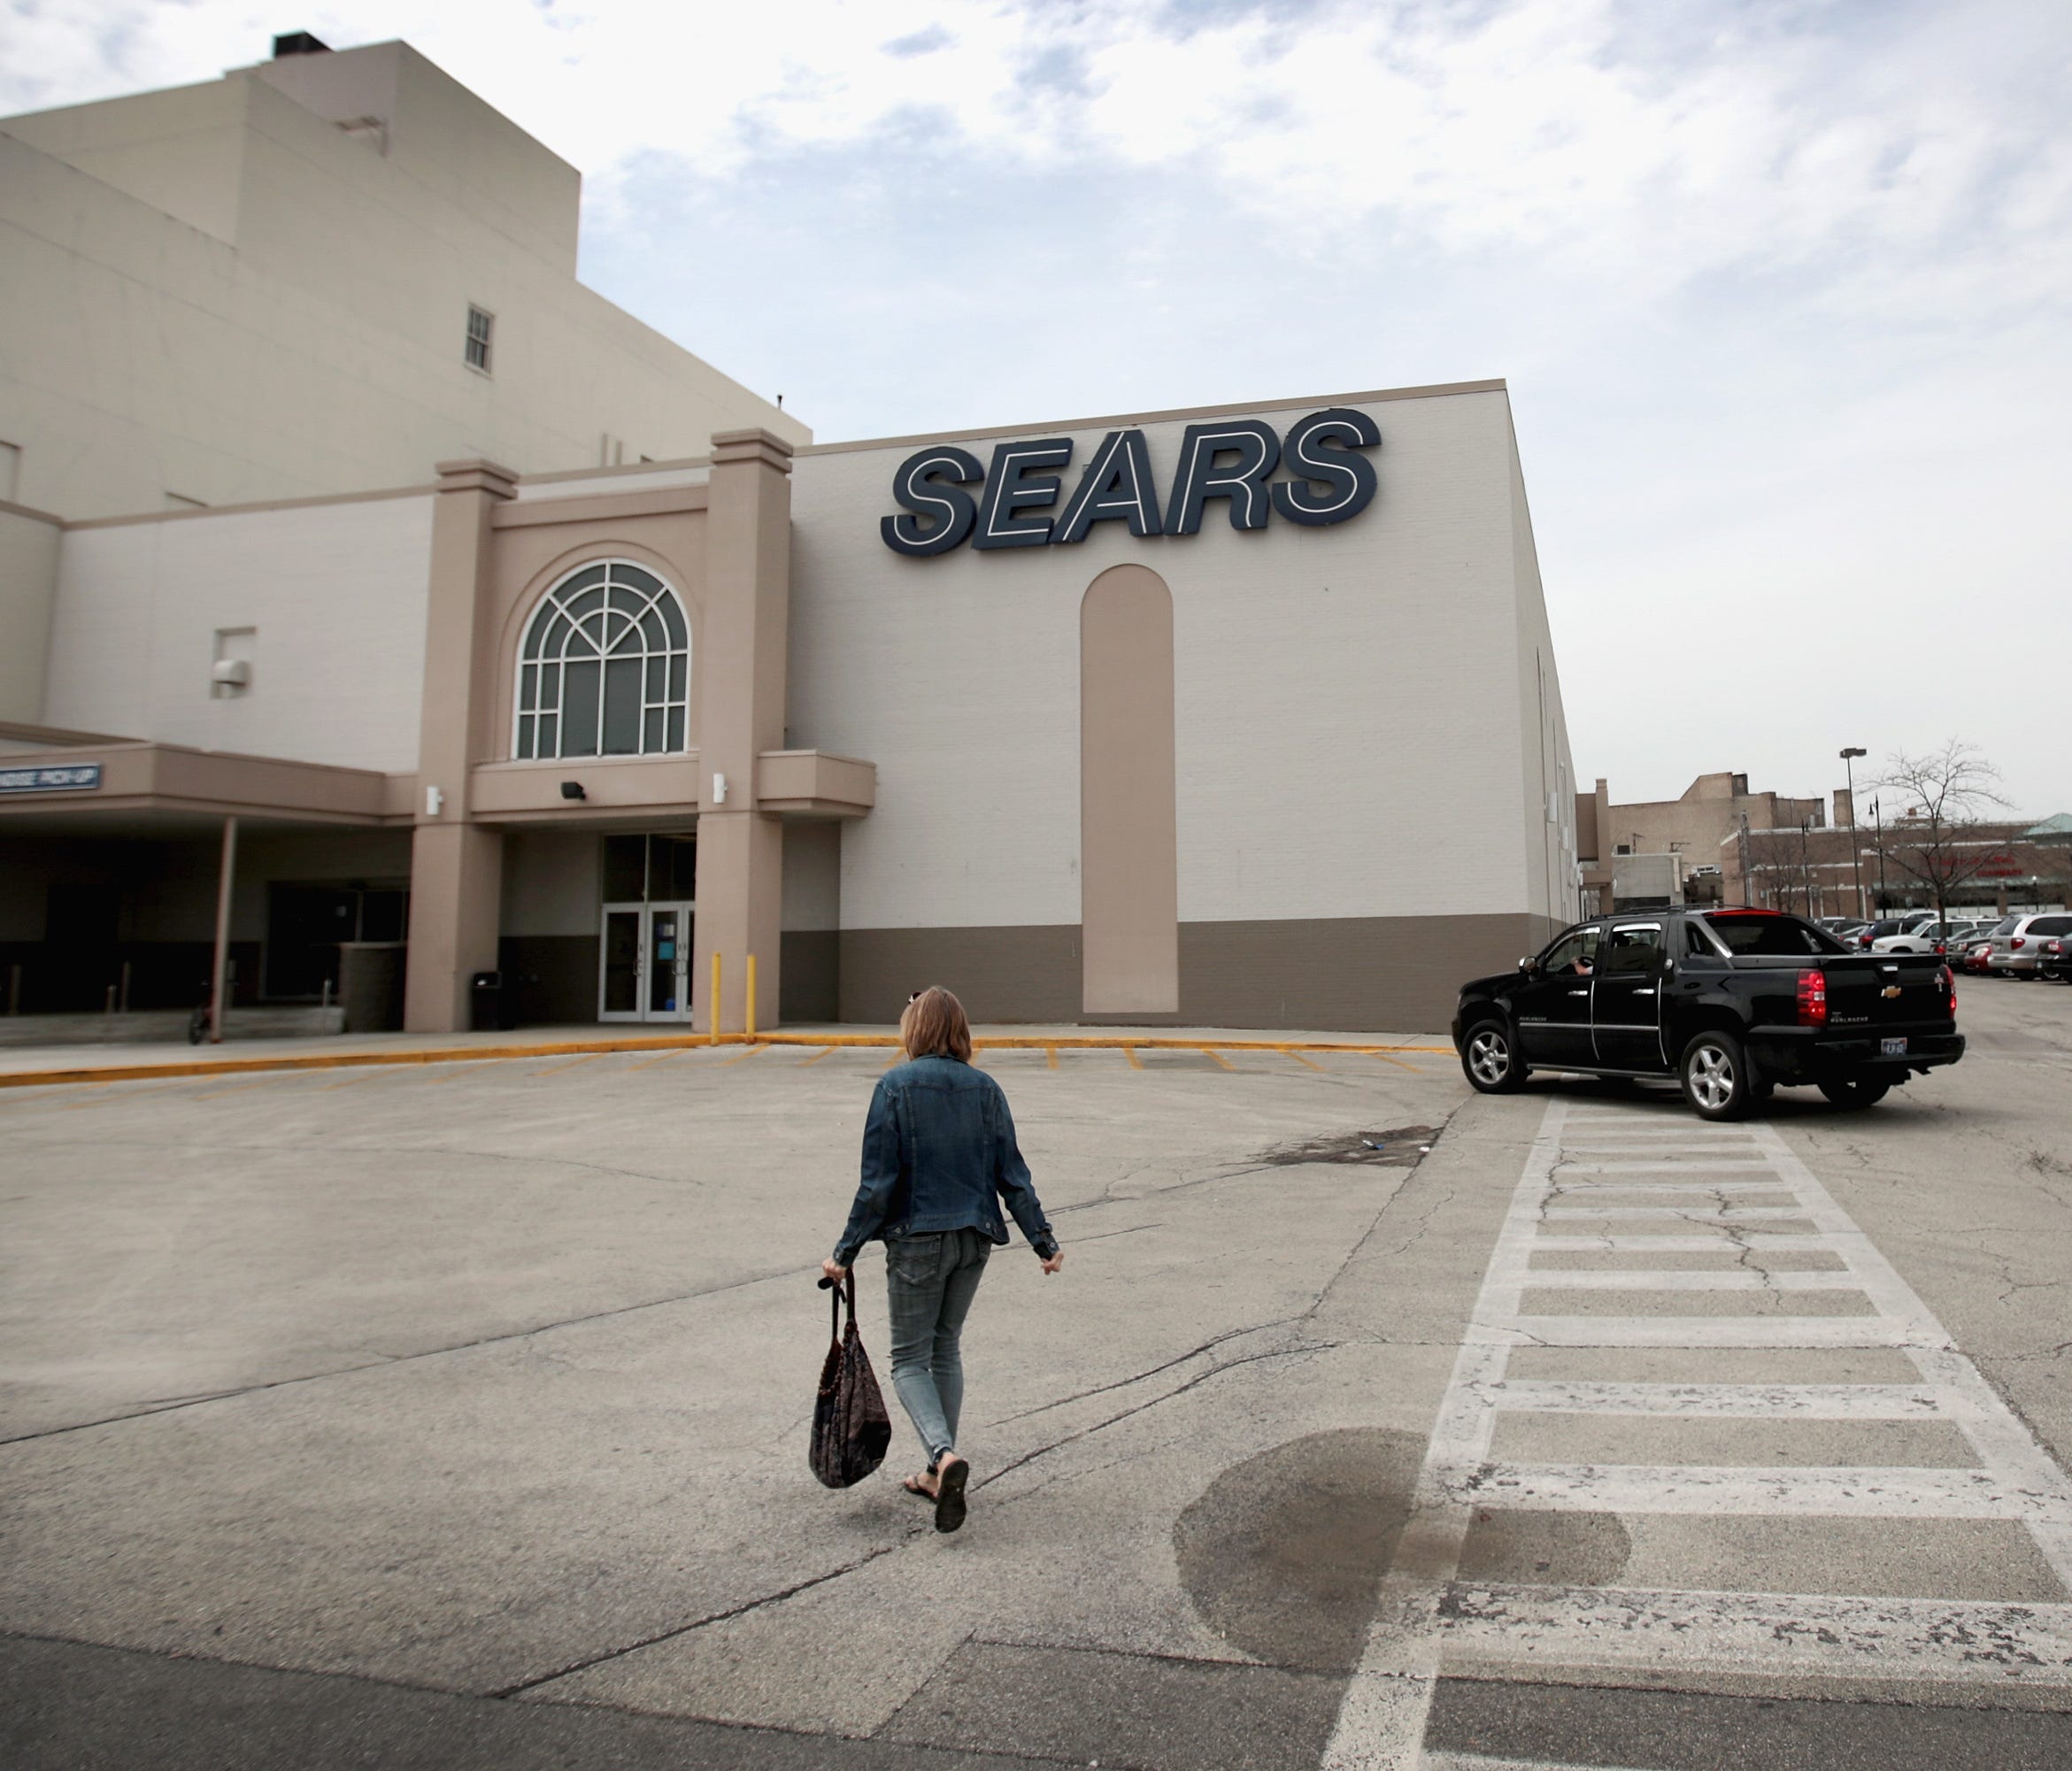 Customers shop at Chicago's last remaining Sears store May 3, 2018 in Chicago. The store, which opened in 1938, is scheduled to close in July. Sears opened its first retail store in Chicago in 1925.